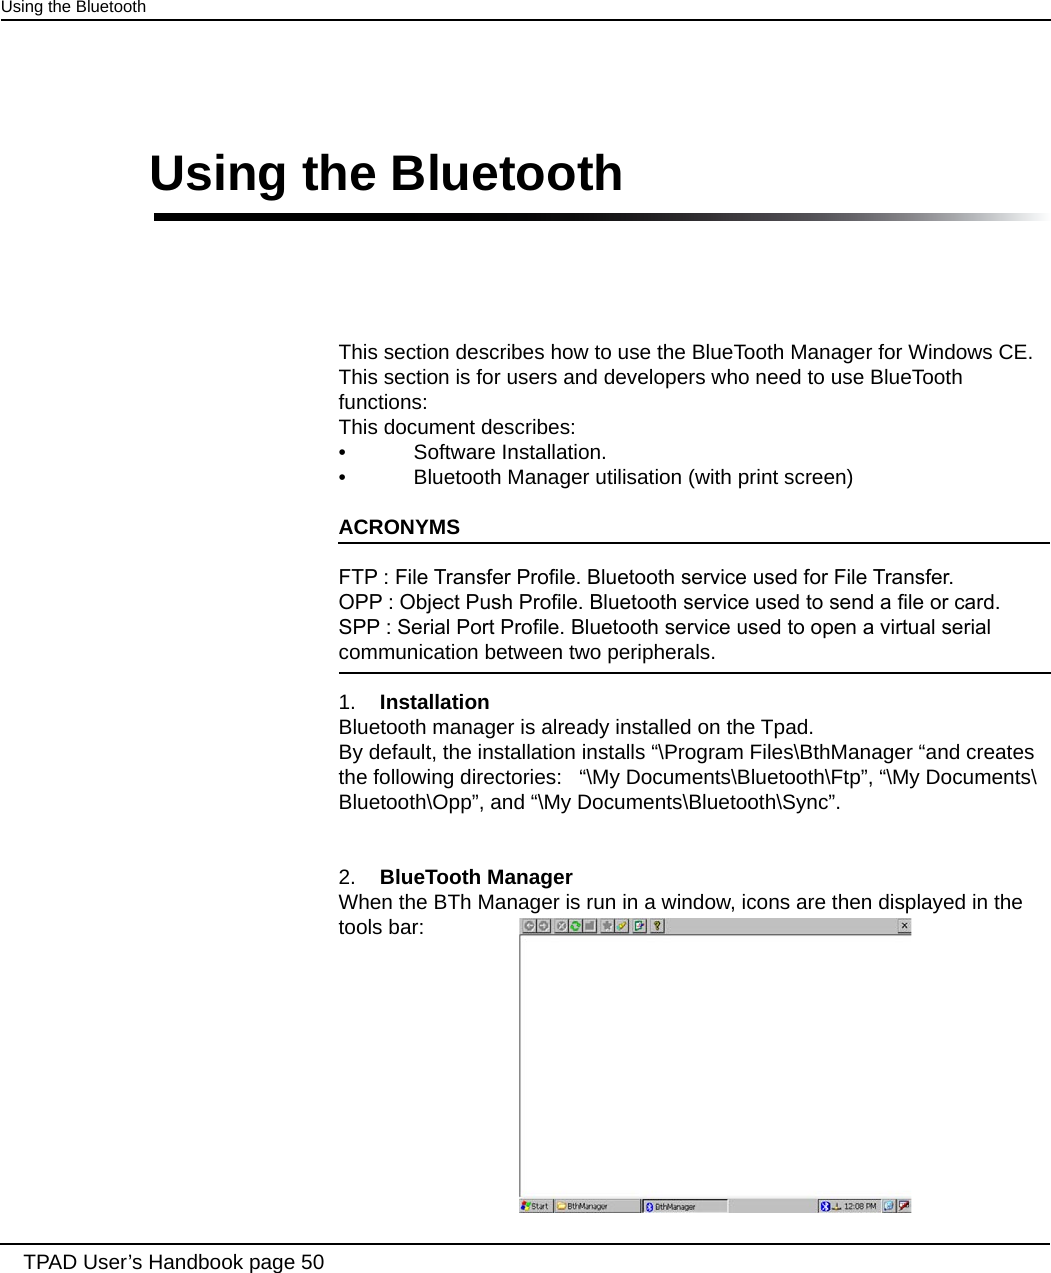 This section describes how to use the BlueTooth Manager for Windows CE. This section is for users and developers who need to use BlueTooth functions:This document describes:•  Software Installation.•  Bluetooth Manager utilisation (with print screen)ACRONYMSFTP : File Transfer Prole. Bluetooth service used for File Transfer.OPP : Object Push Prole. Bluetooth service used to send a le or card.SPP : Serial Port Prole. Bluetooth service used to open a virtual serial communication between two peripherals. 1.  InstallationBluetooth manager is already installed on the Tpad. By default, the installation installs “\Program Files\BthManager “and creates the following directories:   “\My Documents\Bluetooth\Ftp”, “\My Documents\Bluetooth\Opp”, and “\My Documents\Bluetooth\Sync”.2.  BlueTooth ManagerWhen the BTh Manager is run in a window, icons are then displayed in the tools bar: TPAD User’s Handbook page 50Using the BluetoothUsing the Bluetooth